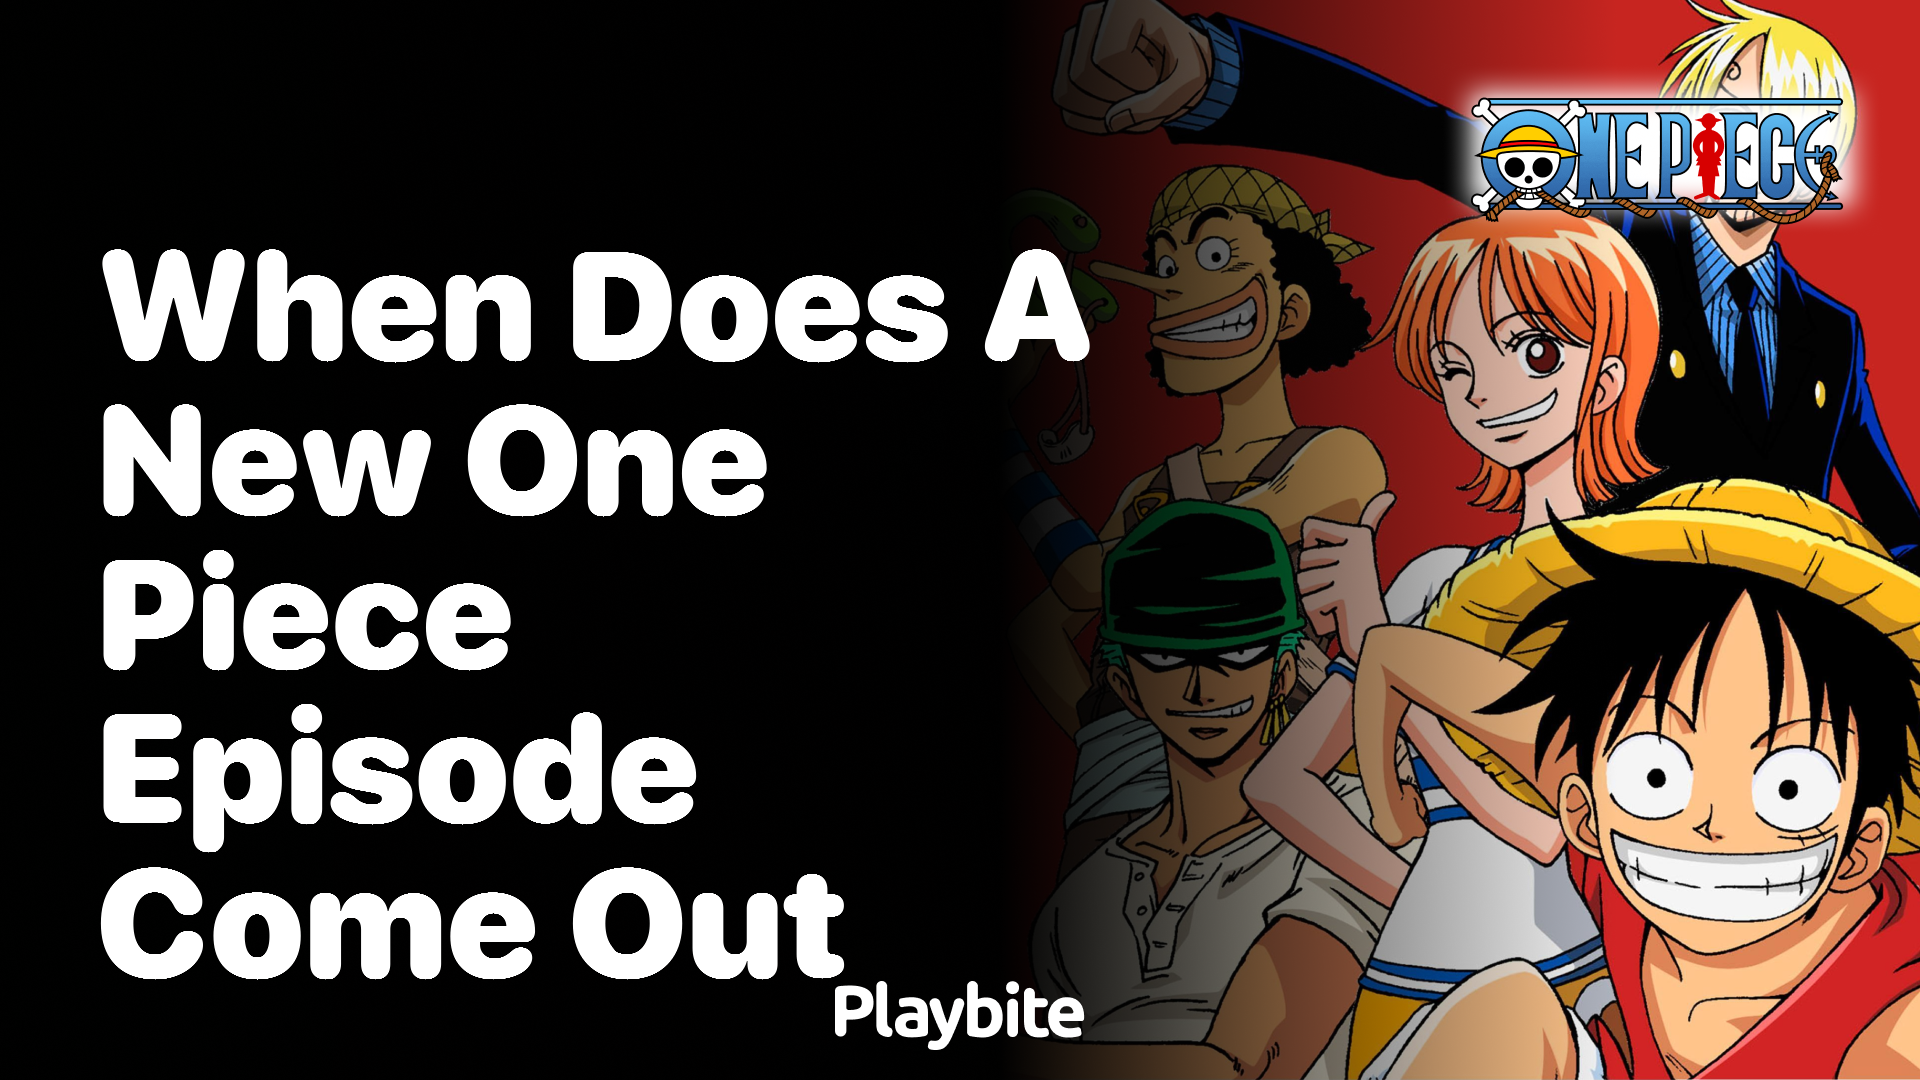 When does a new One Piece episode come out?